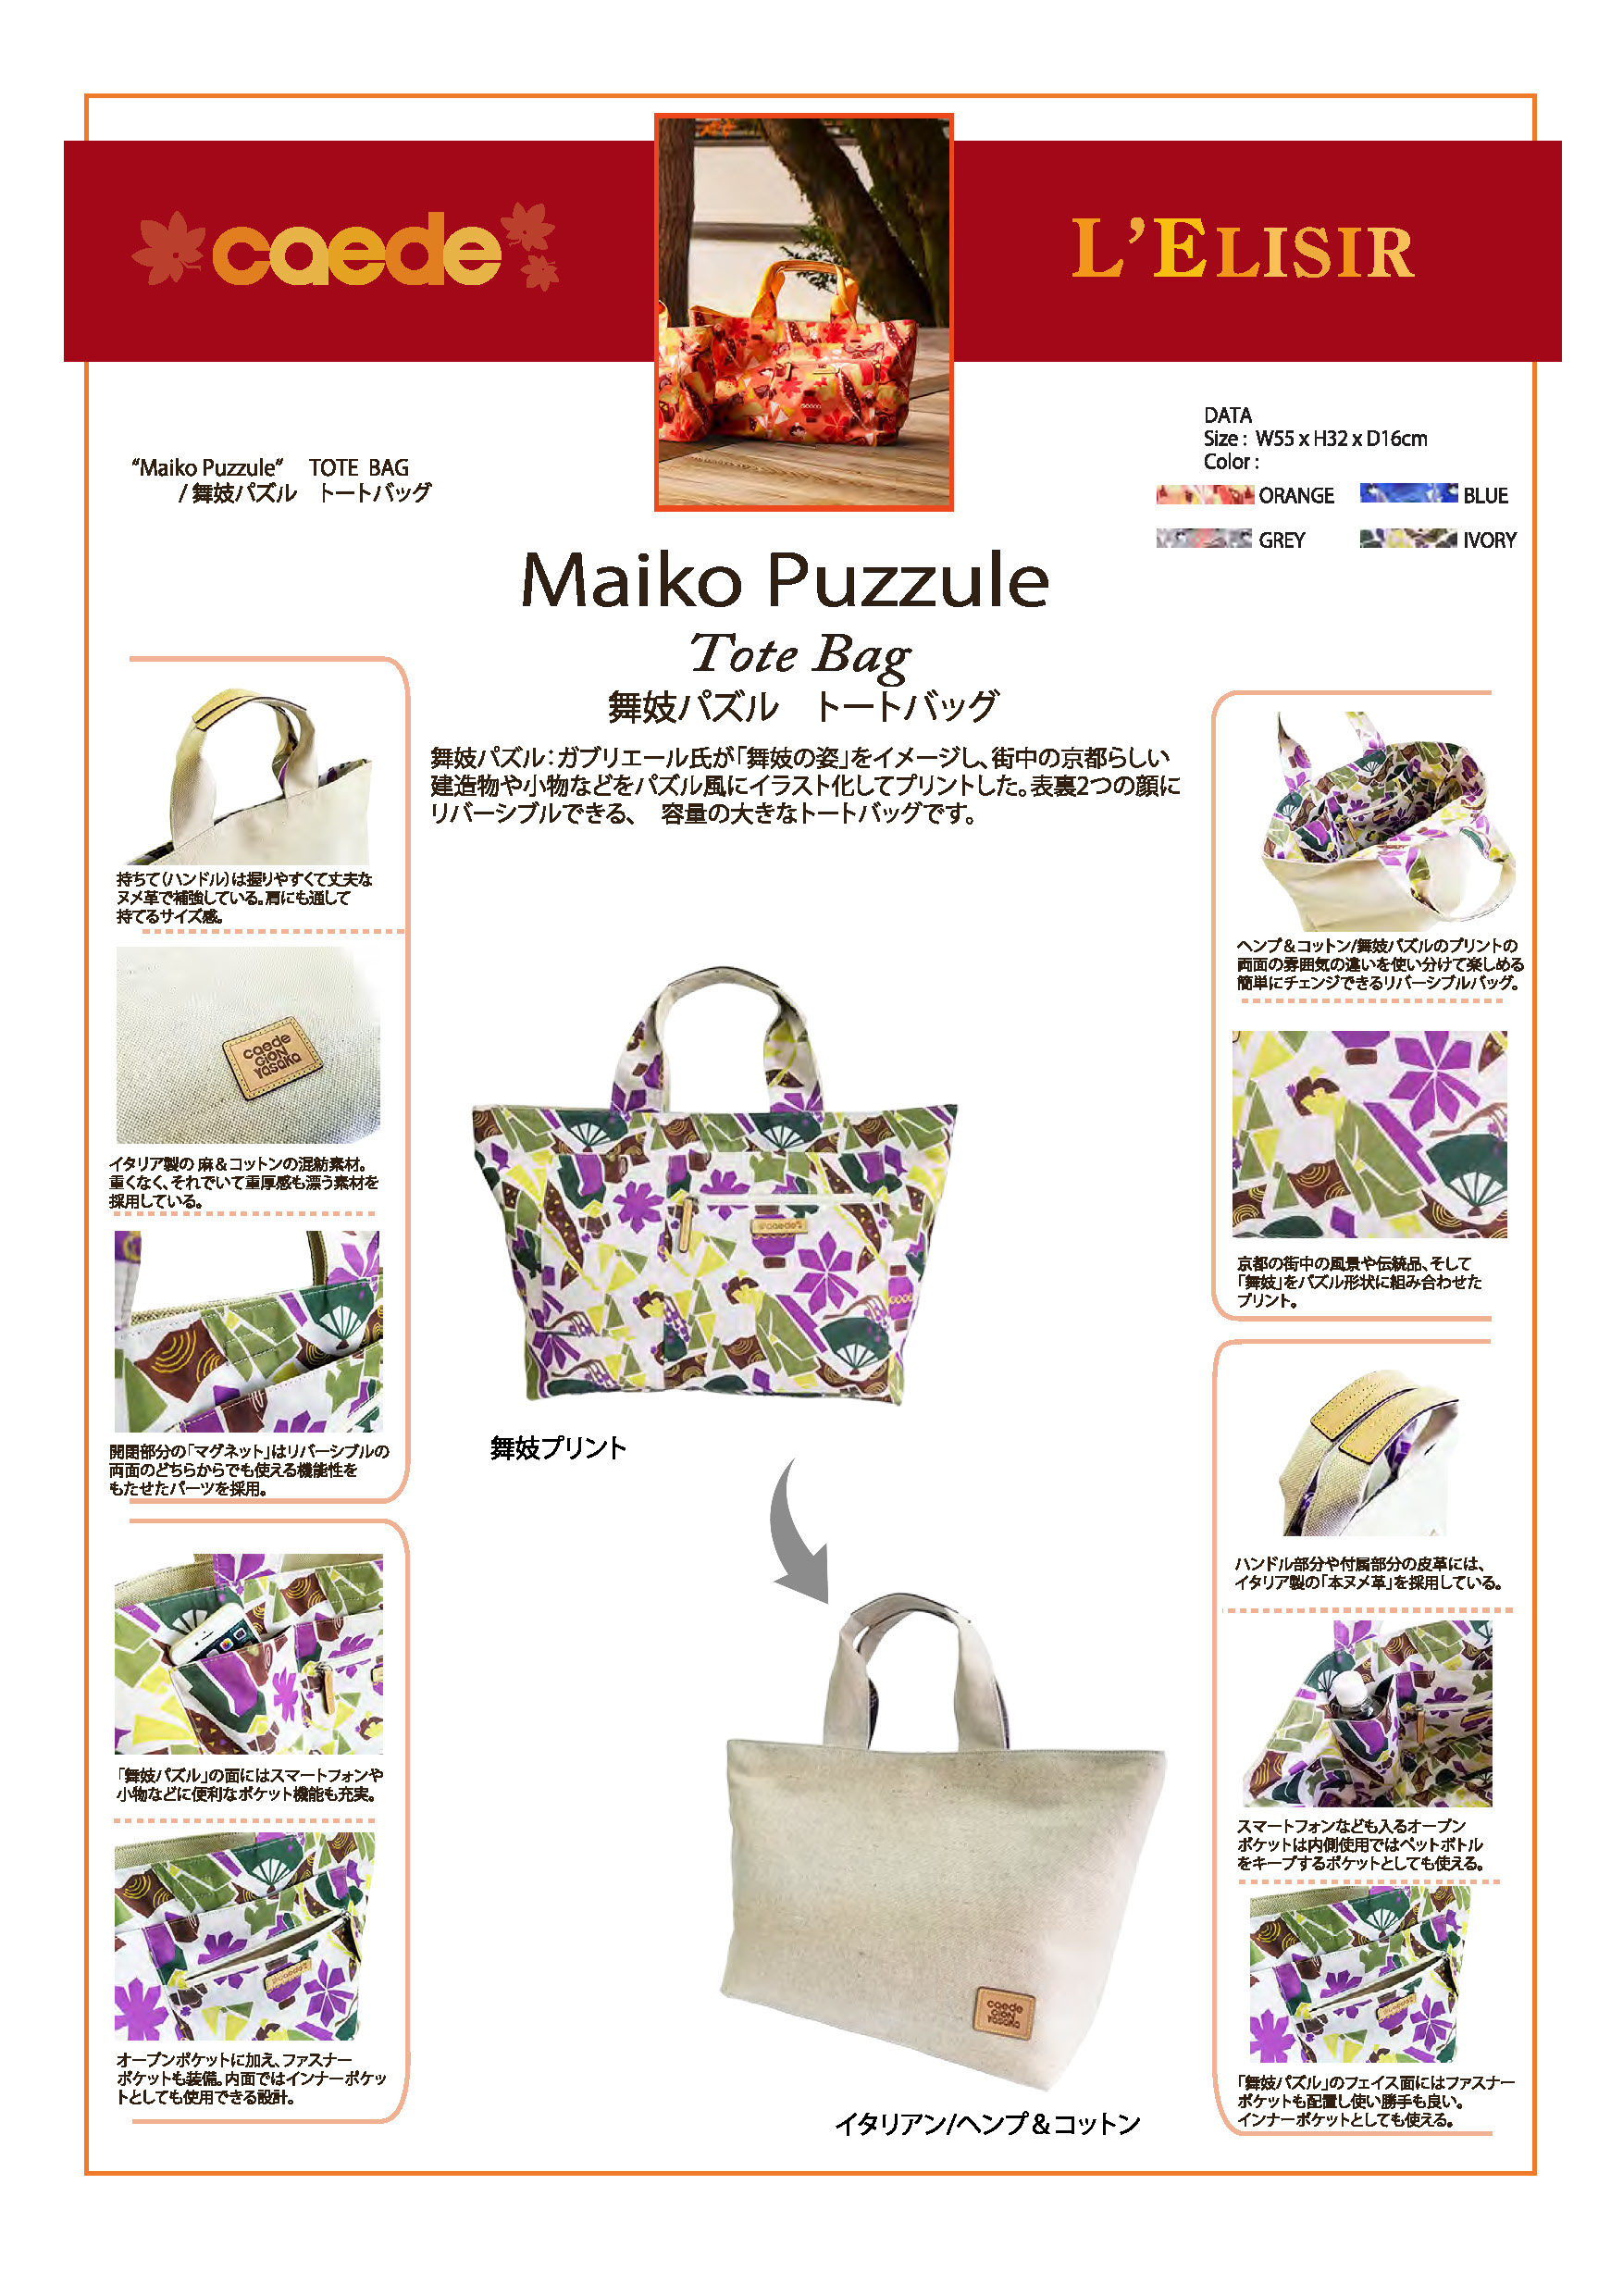 72663-maiko-puzzule-tote-bag機能説明